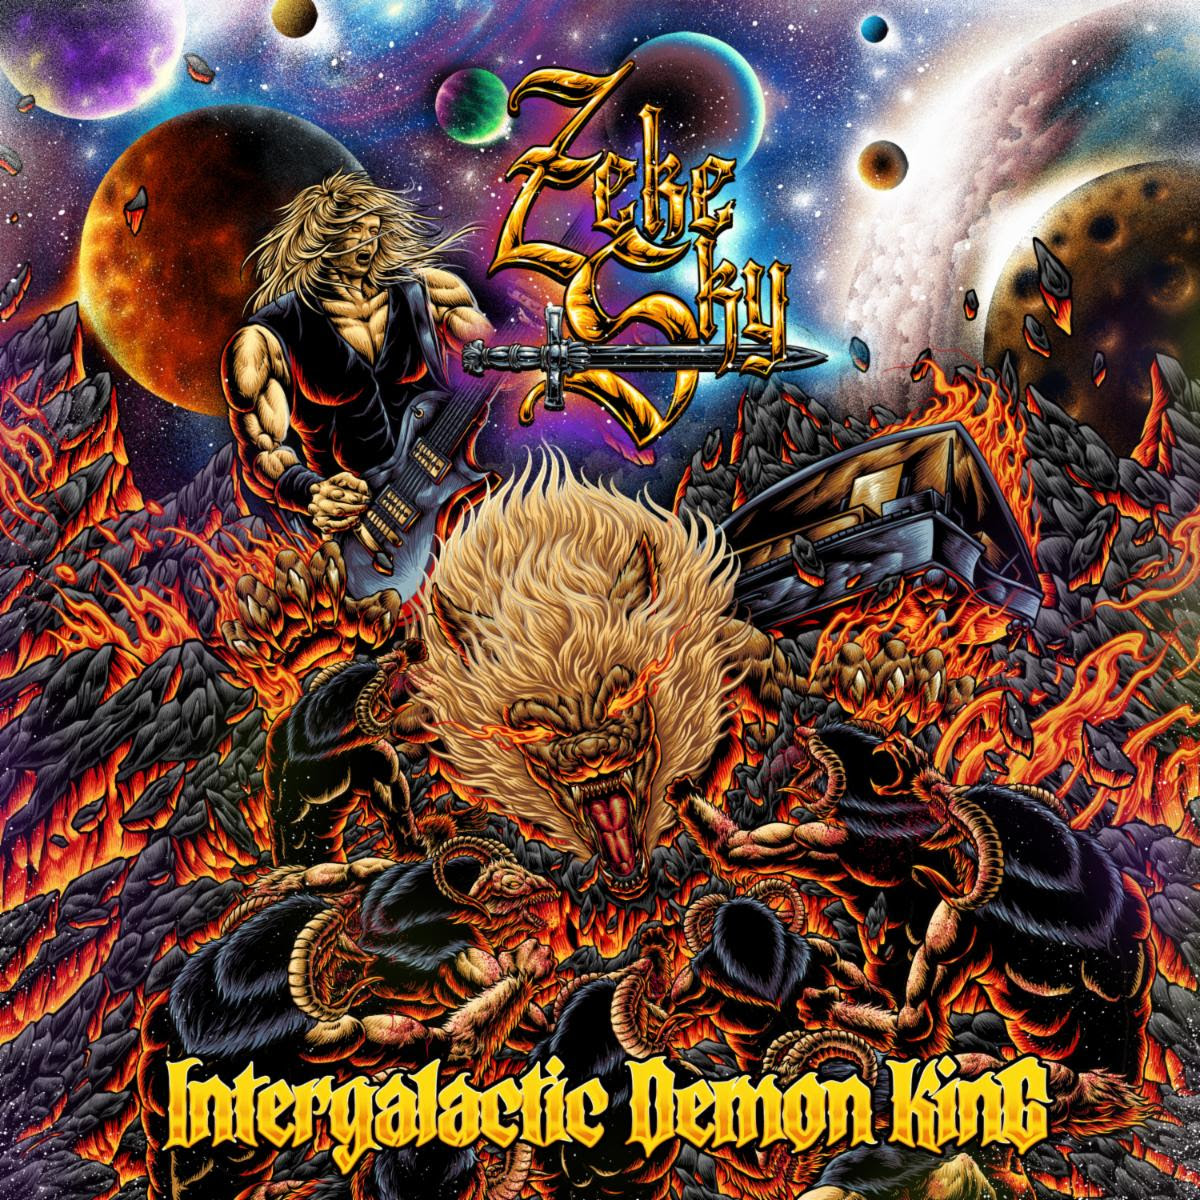 Album cover art for "intergalactic demon king" by Zeke Sky, featuring a fiery landscape with a lion-like beast, a guitarist, planets, and swirling cosmic elements.